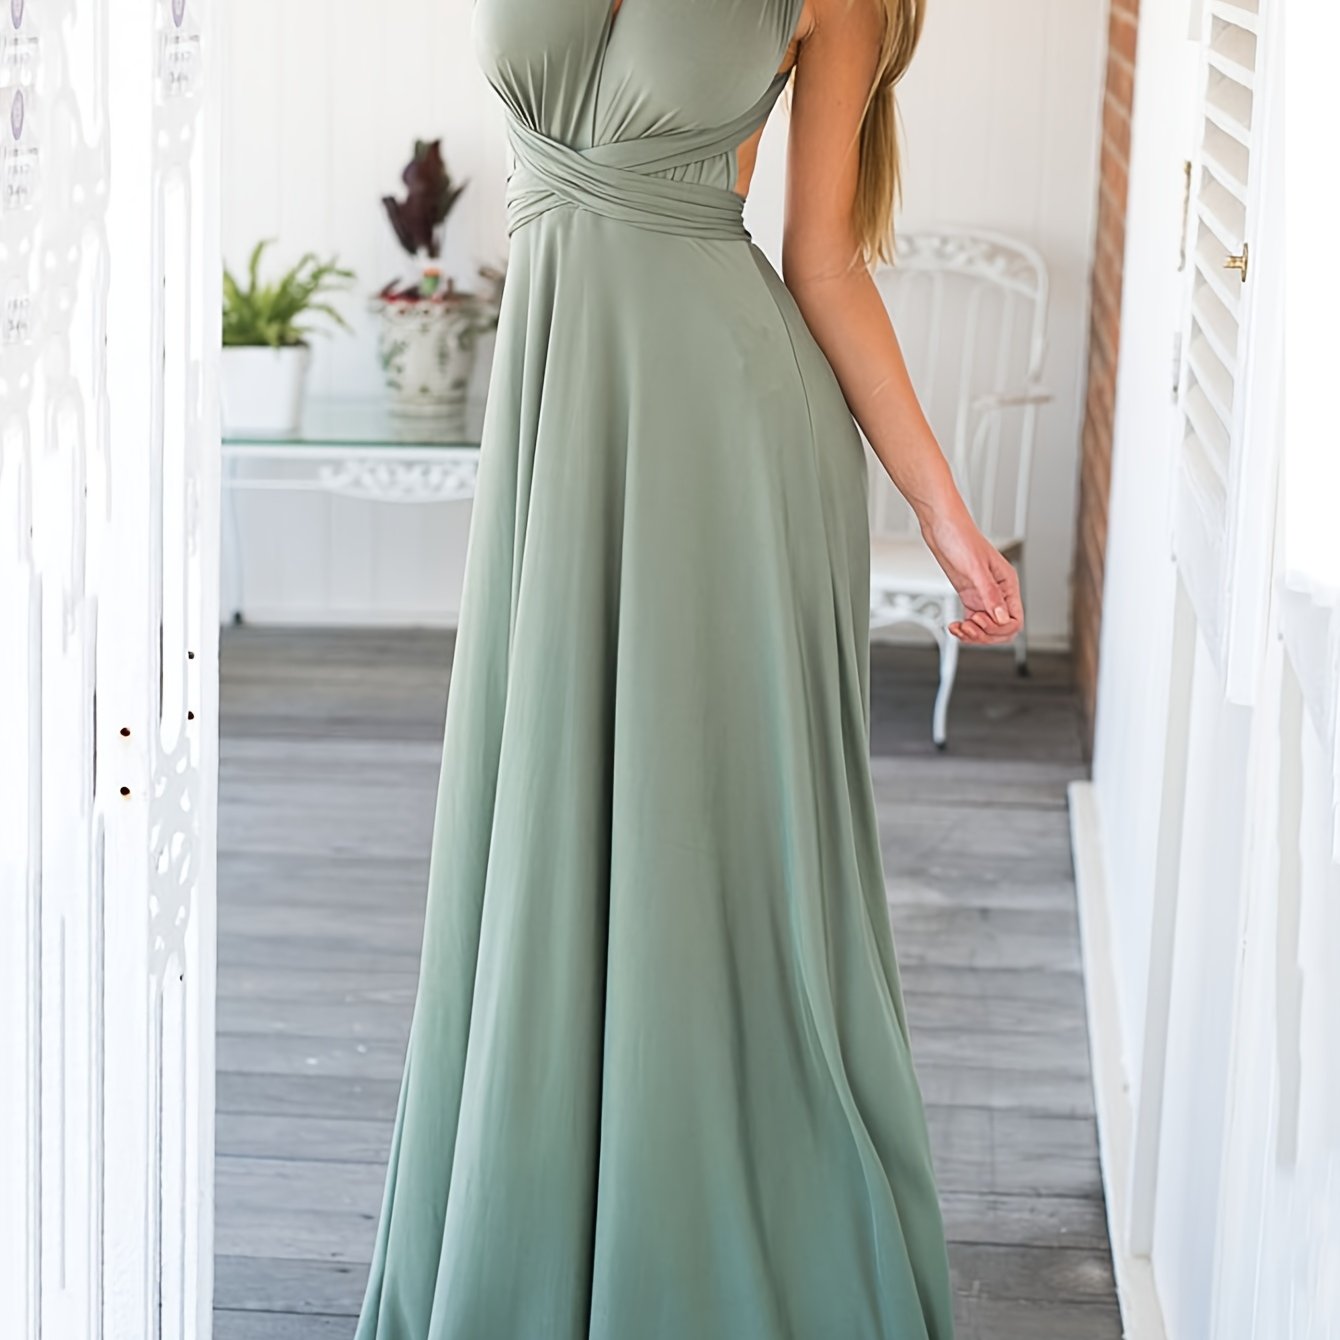 Empower Your Style with Our Elegant Maxi Dresses for Women